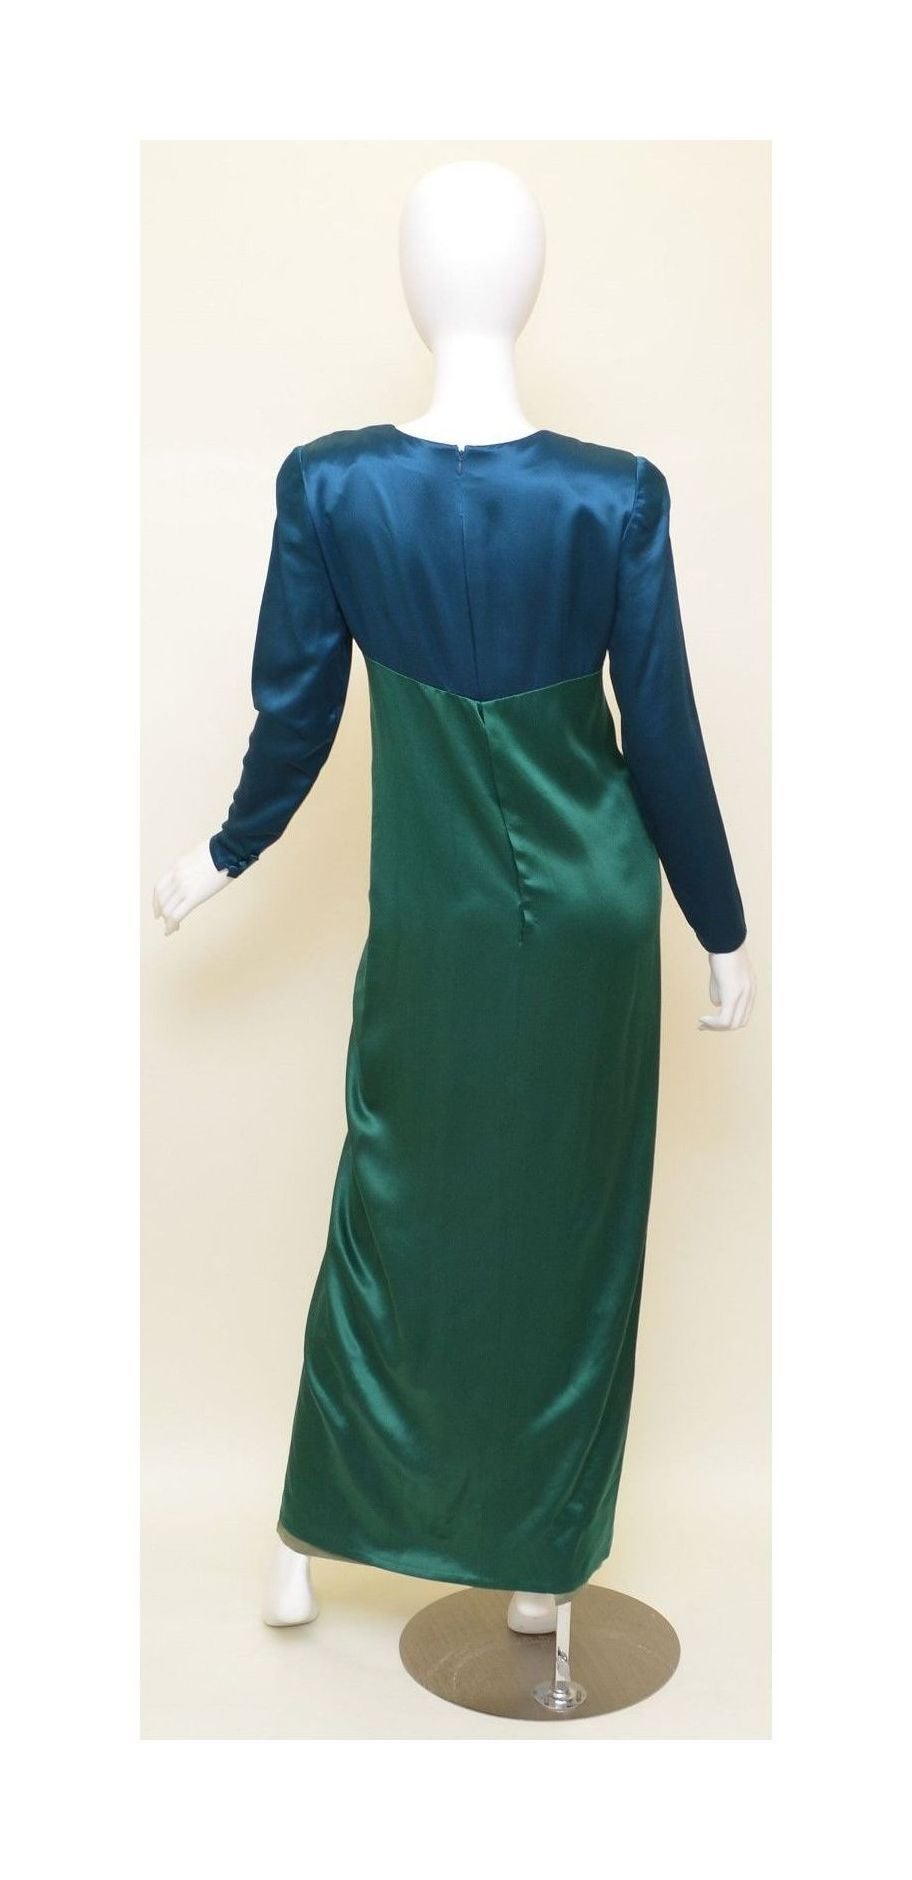 Sophisticated Bill Blass satin long dress features a back zipper fastening, button closures along the cuffs, olive/taupe under layer, and padded shoulders. Dress is in excellent condition overall with minimal wears.

Measurements:
Bust -